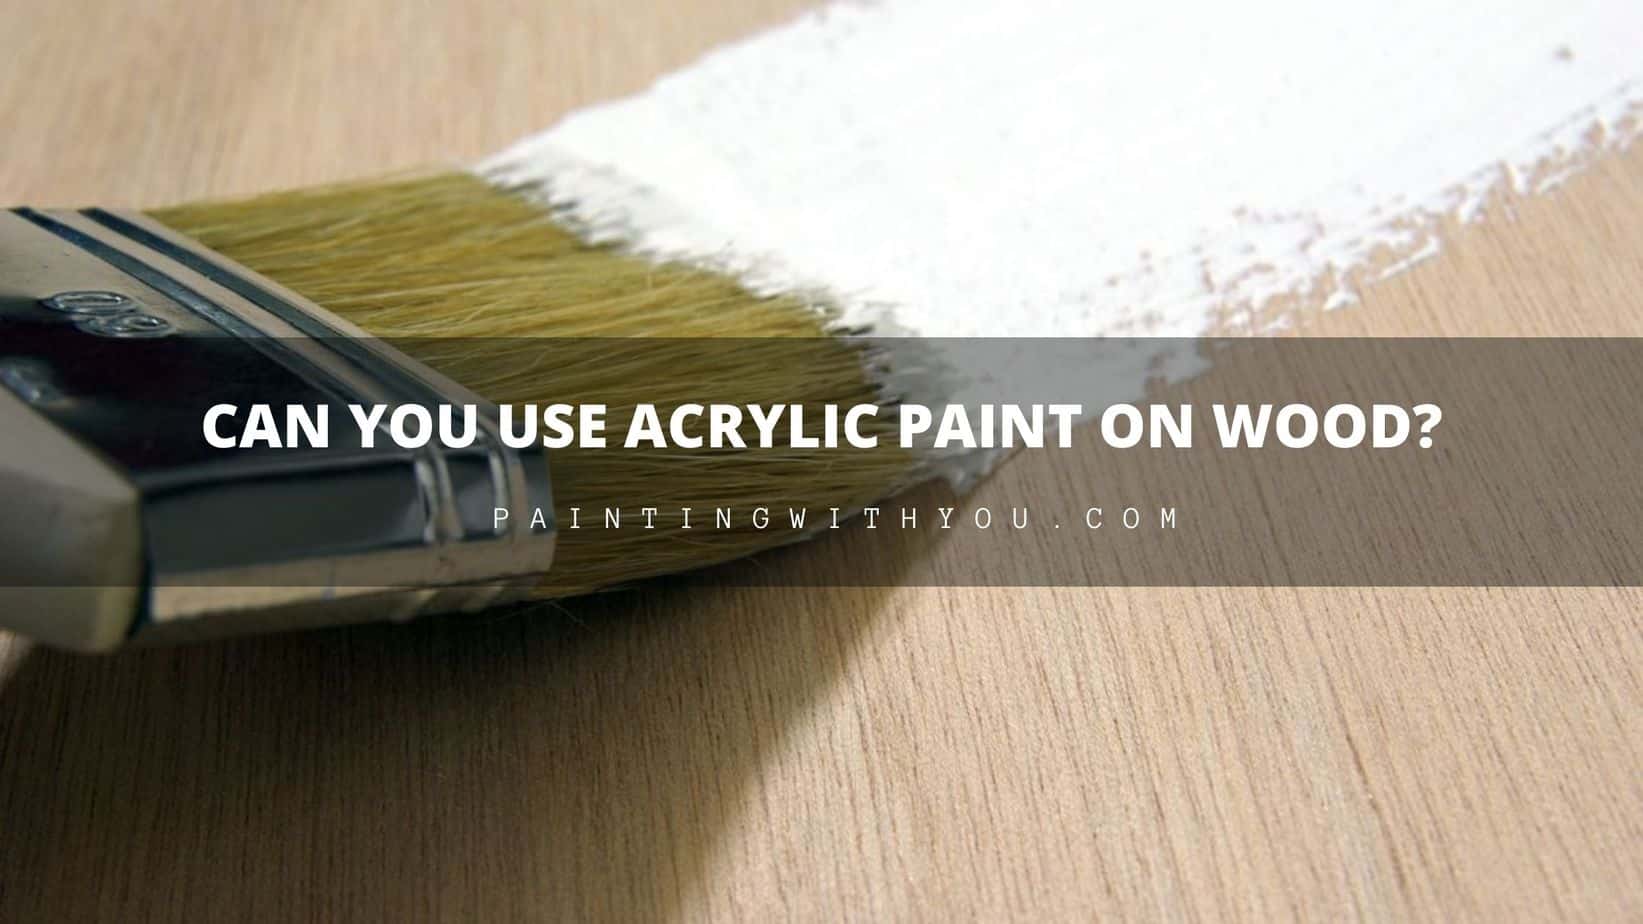 How to Use Acrylic Paint on Wood